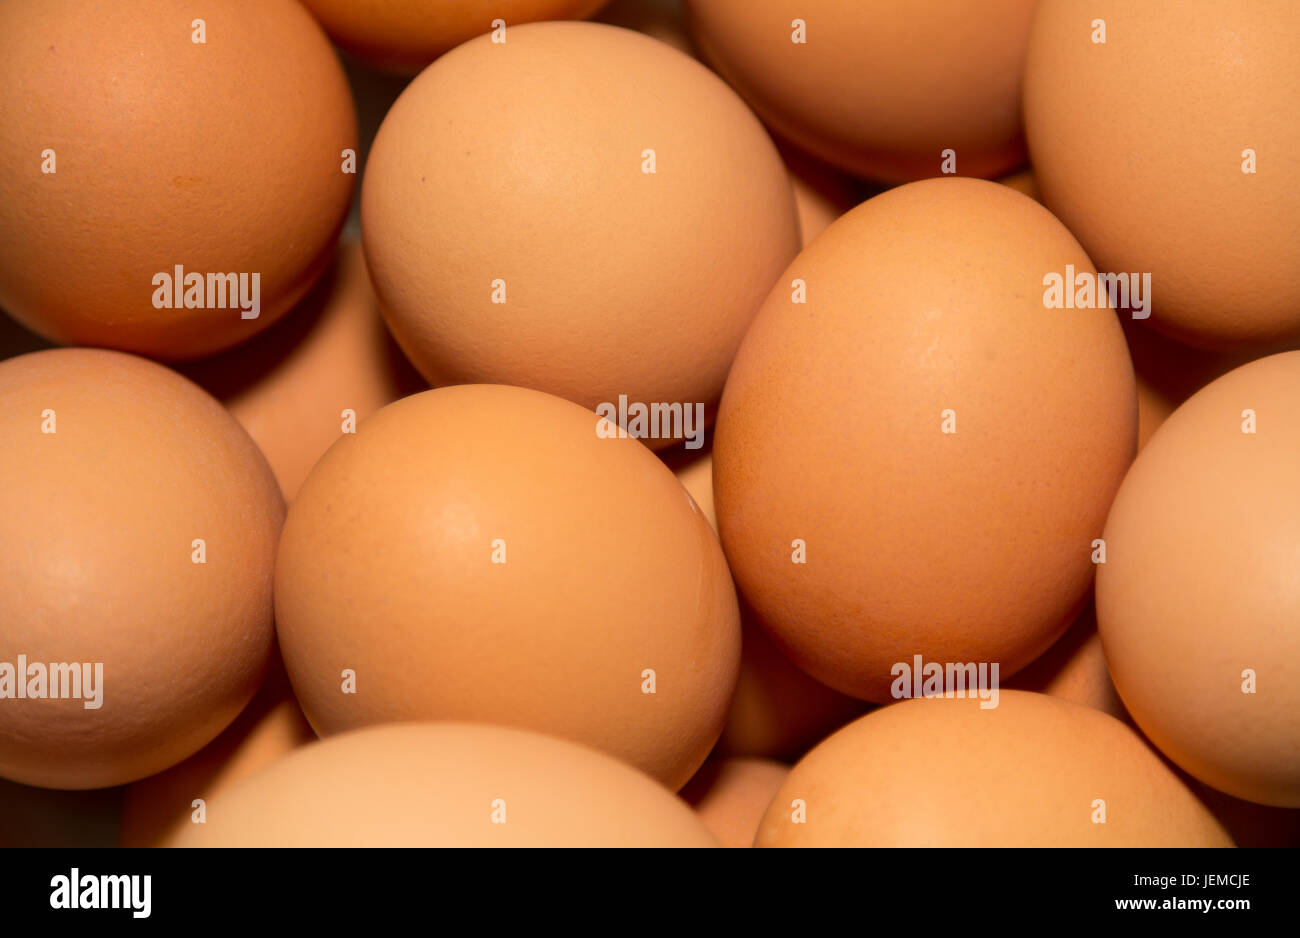 Bowl of brown eggs, bowl not visible. Stock Photo